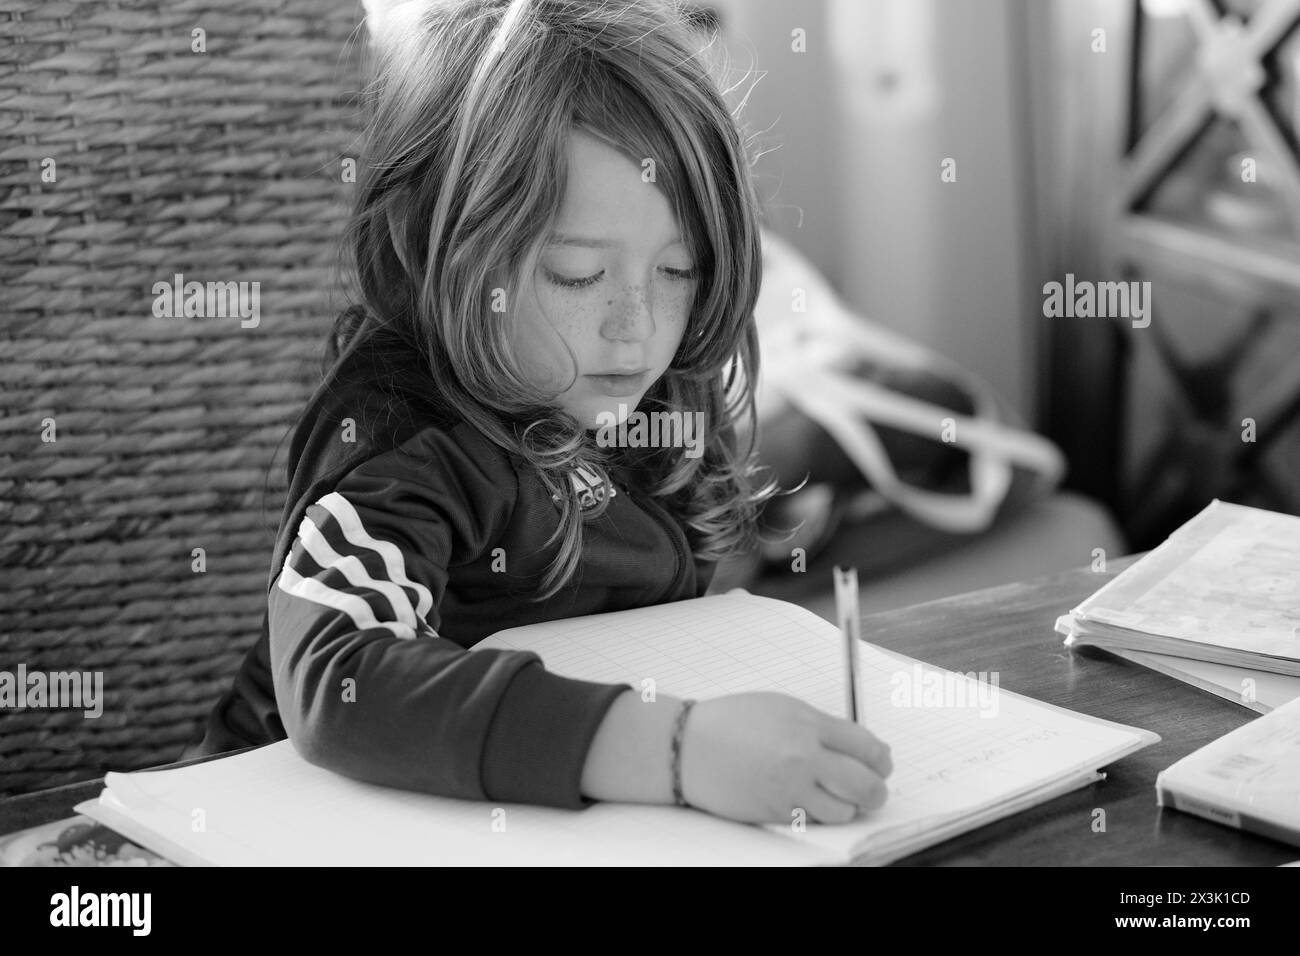 Italy, Sicily; 8 years old male child doing his homework on a table at home Stock Photo